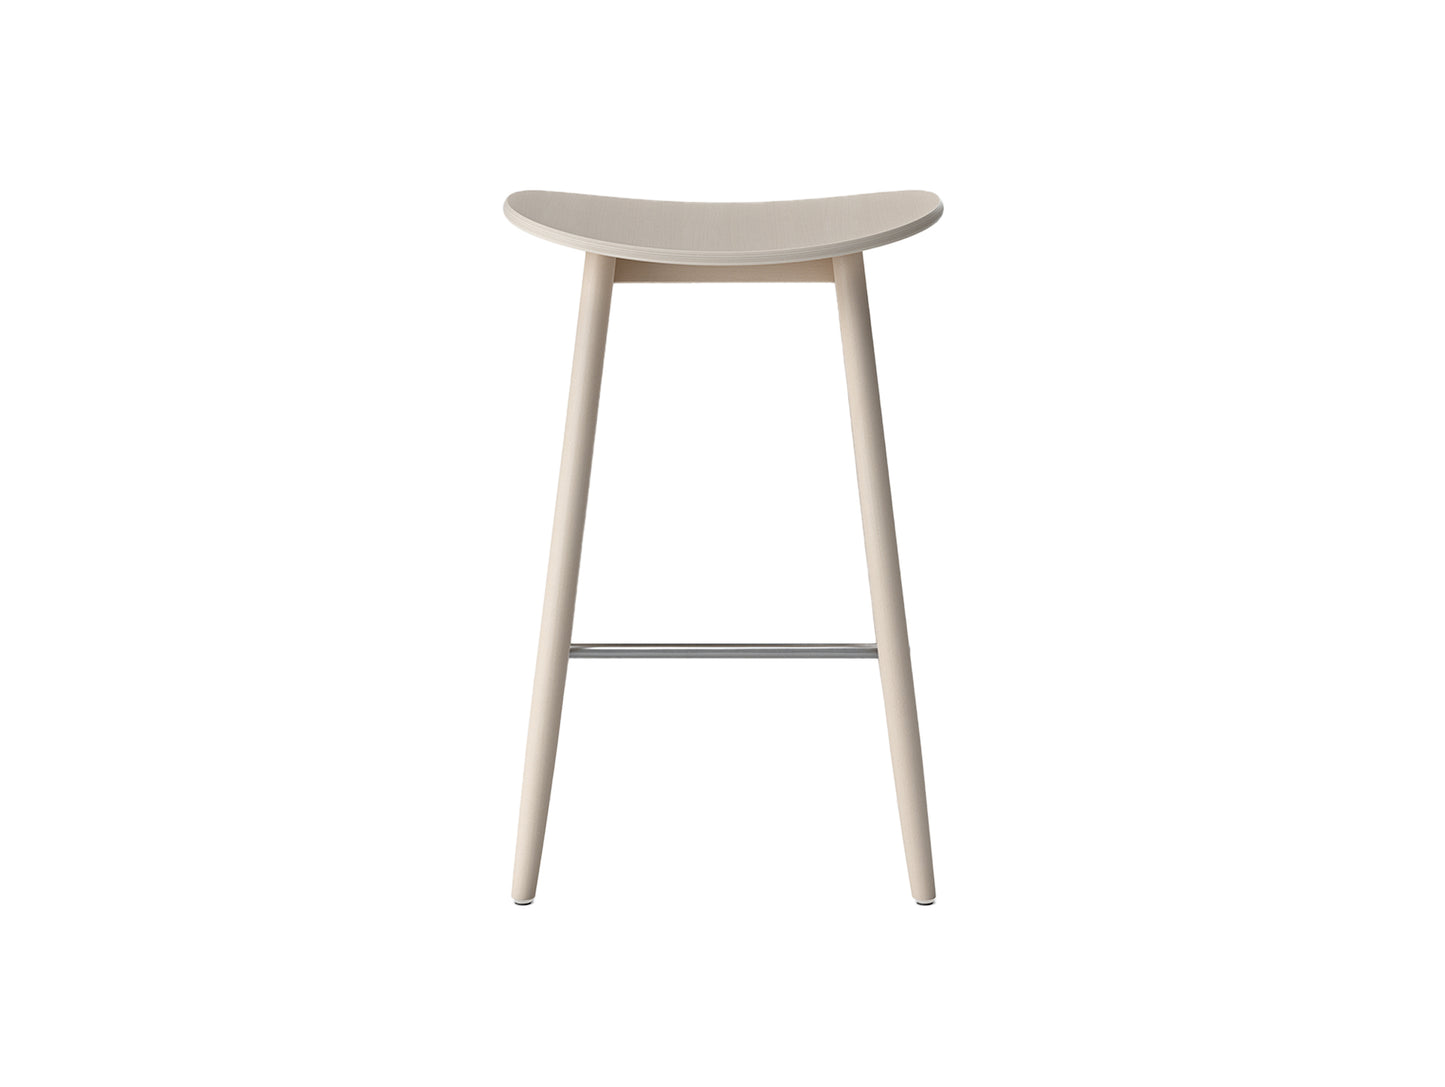 Icha Bar Stool by Massproductions - White Oiled Beech